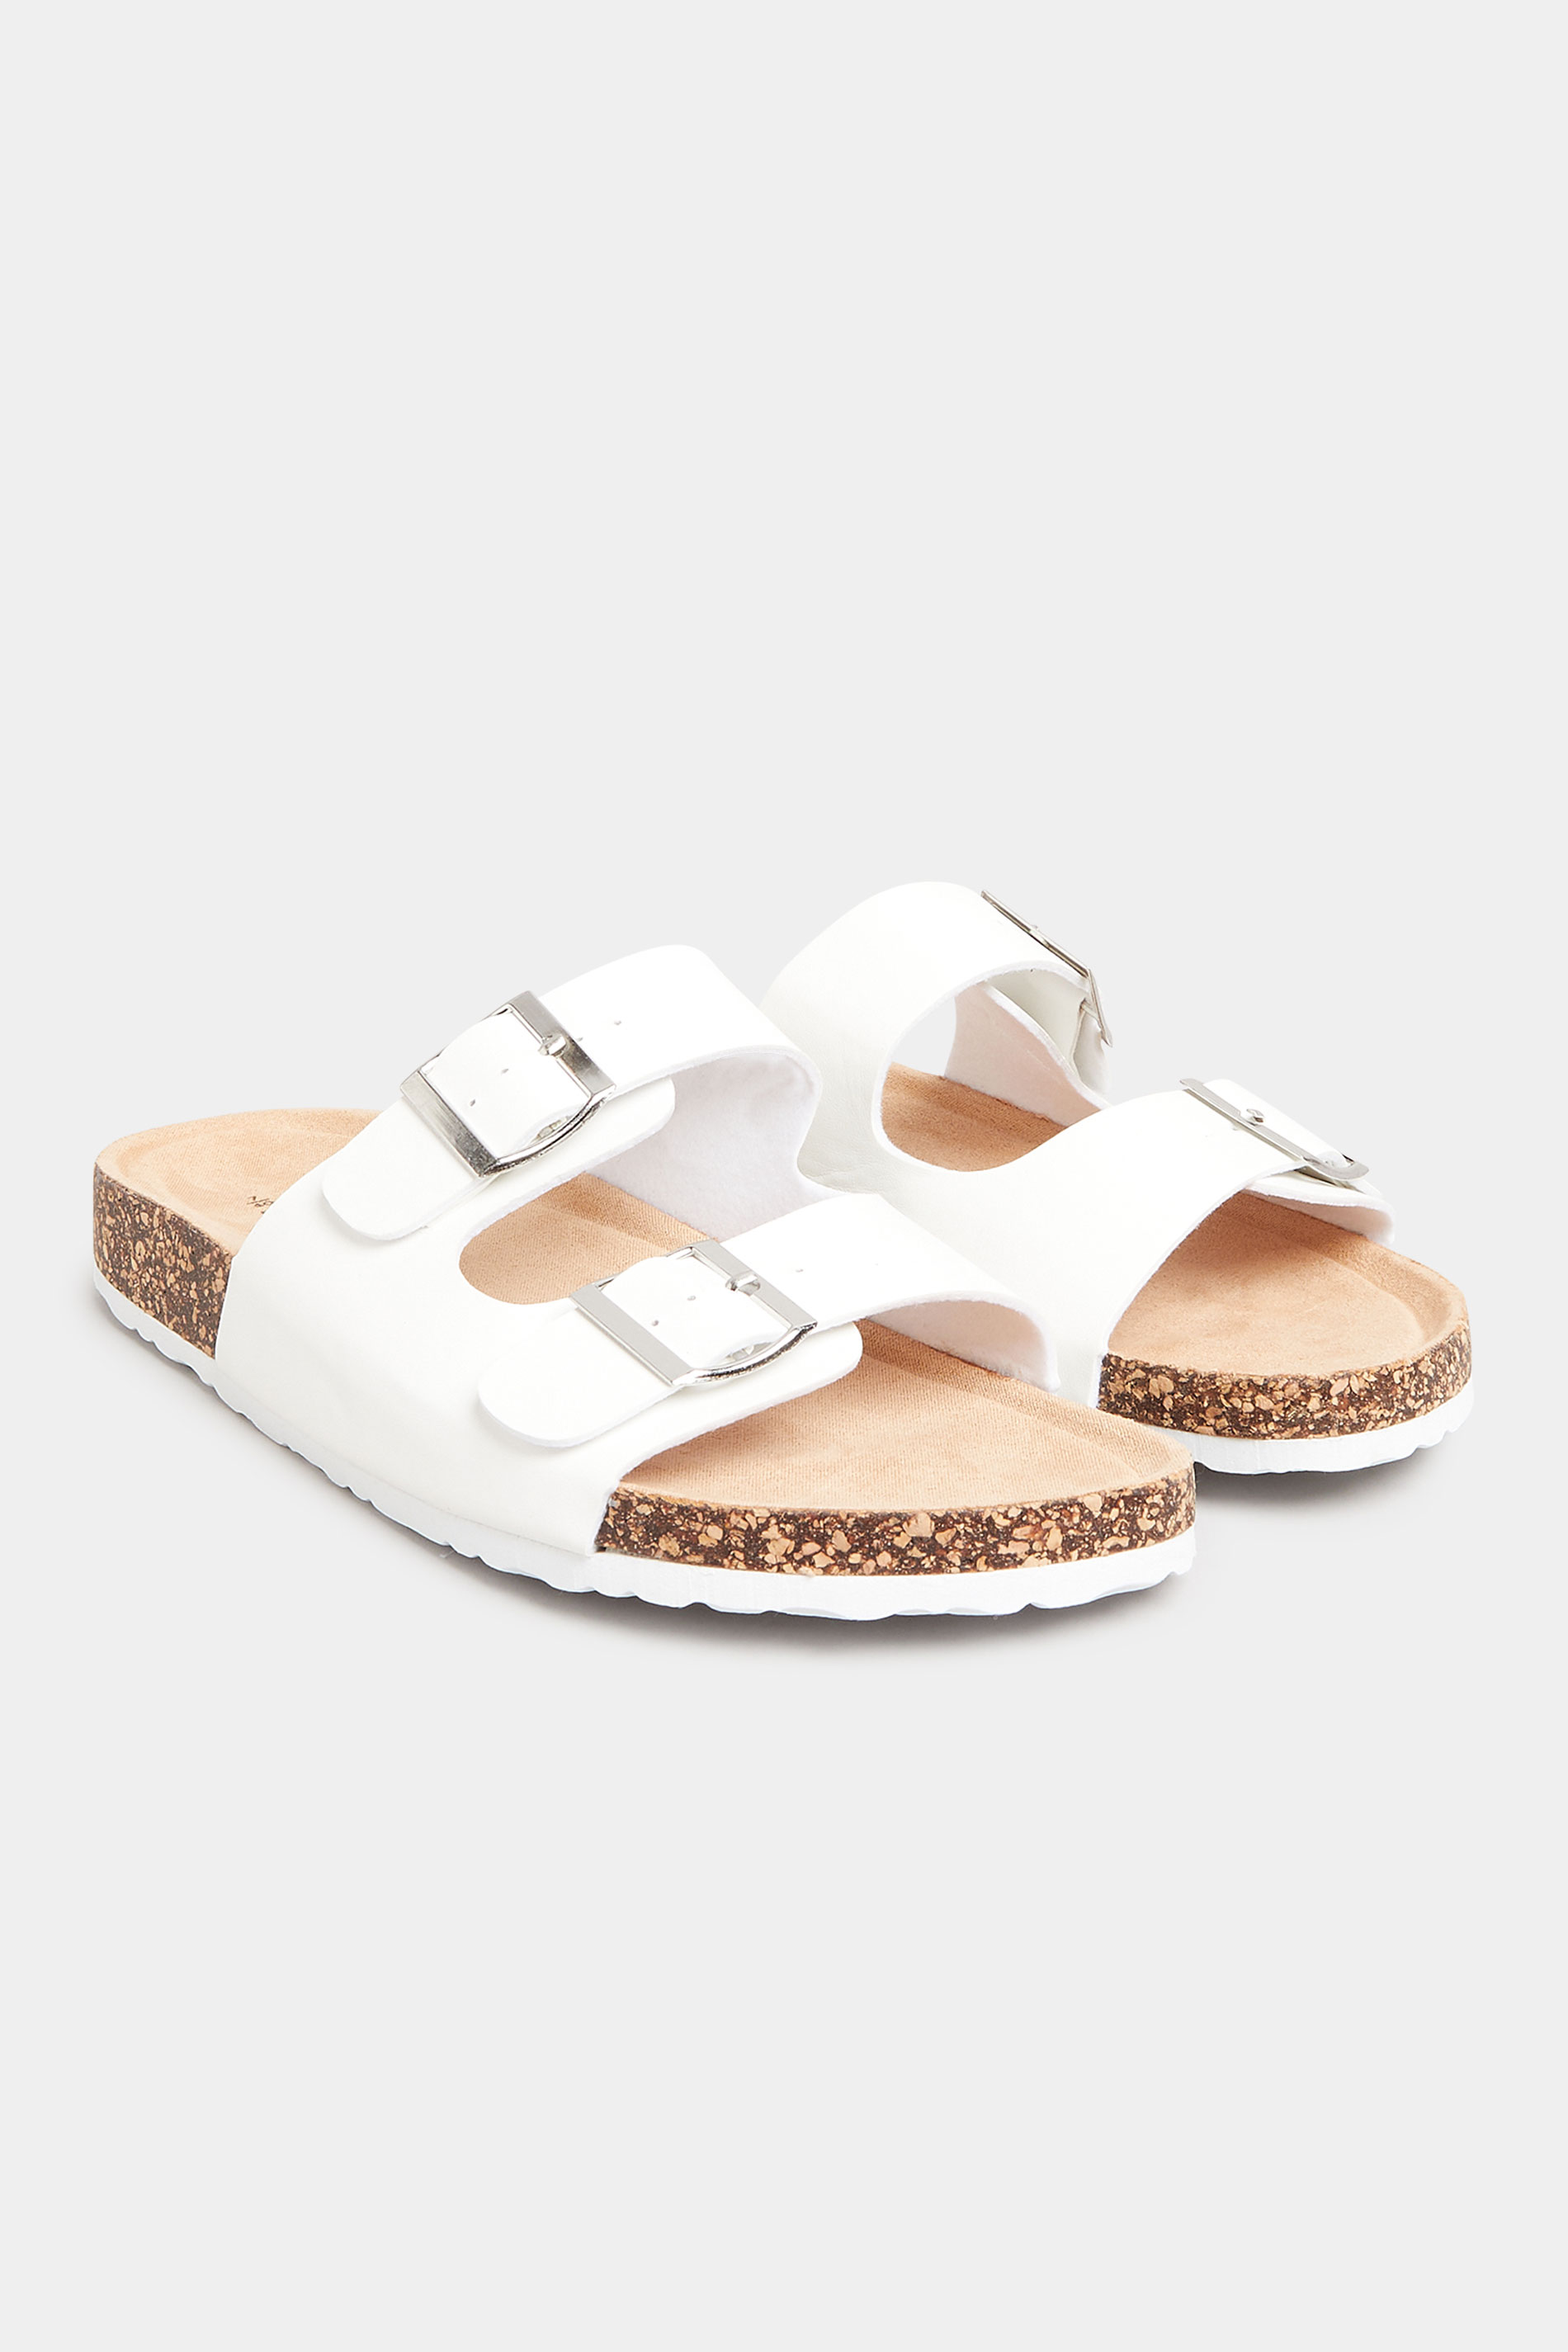 Grande taille  Sandals Grande taille  Flat Sandals | LTS White Buckle Strap Footbed Sandals In Standard D Fit - YA25181